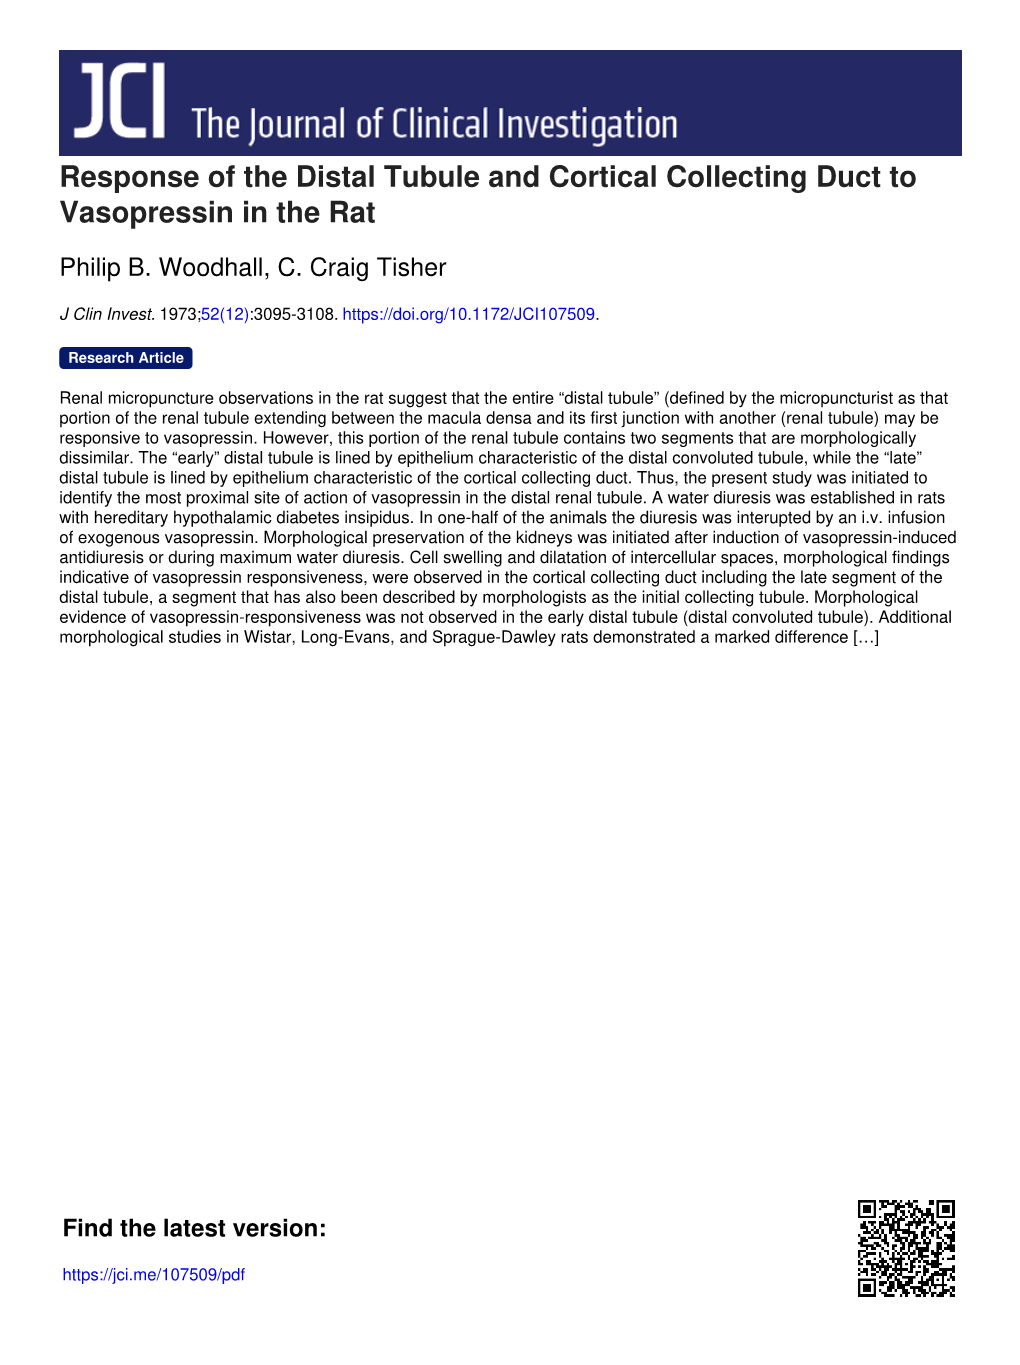 Response of the Distal Tubule and Cortical Collecting Duct to Vasopressin in the Rat